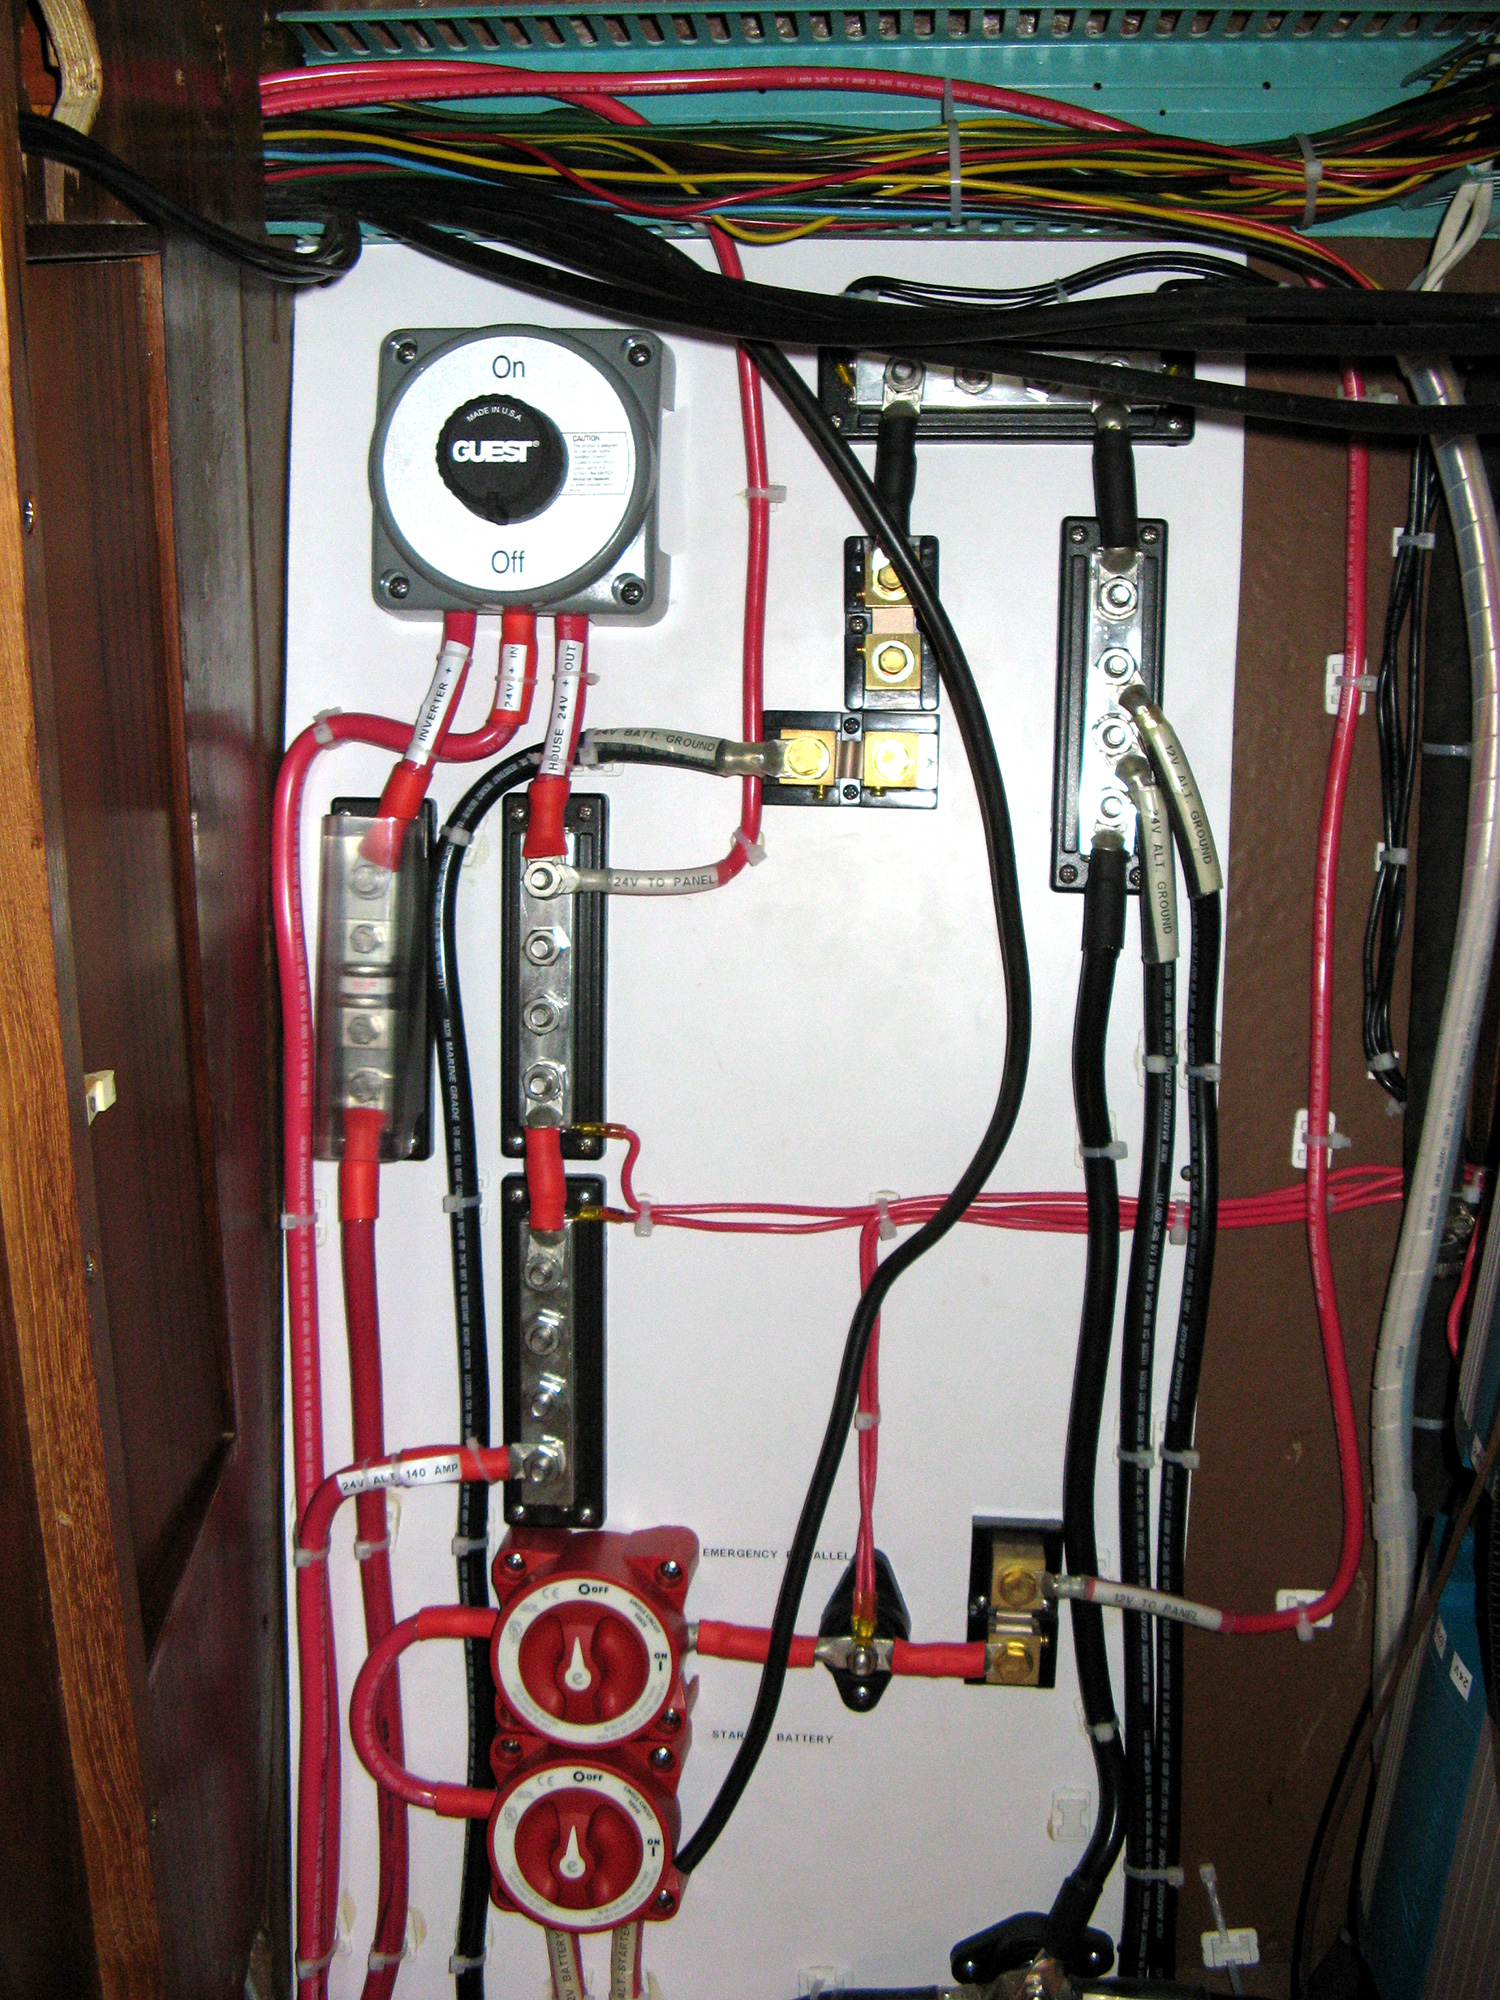 ELECTRICAL SYSTEM - After